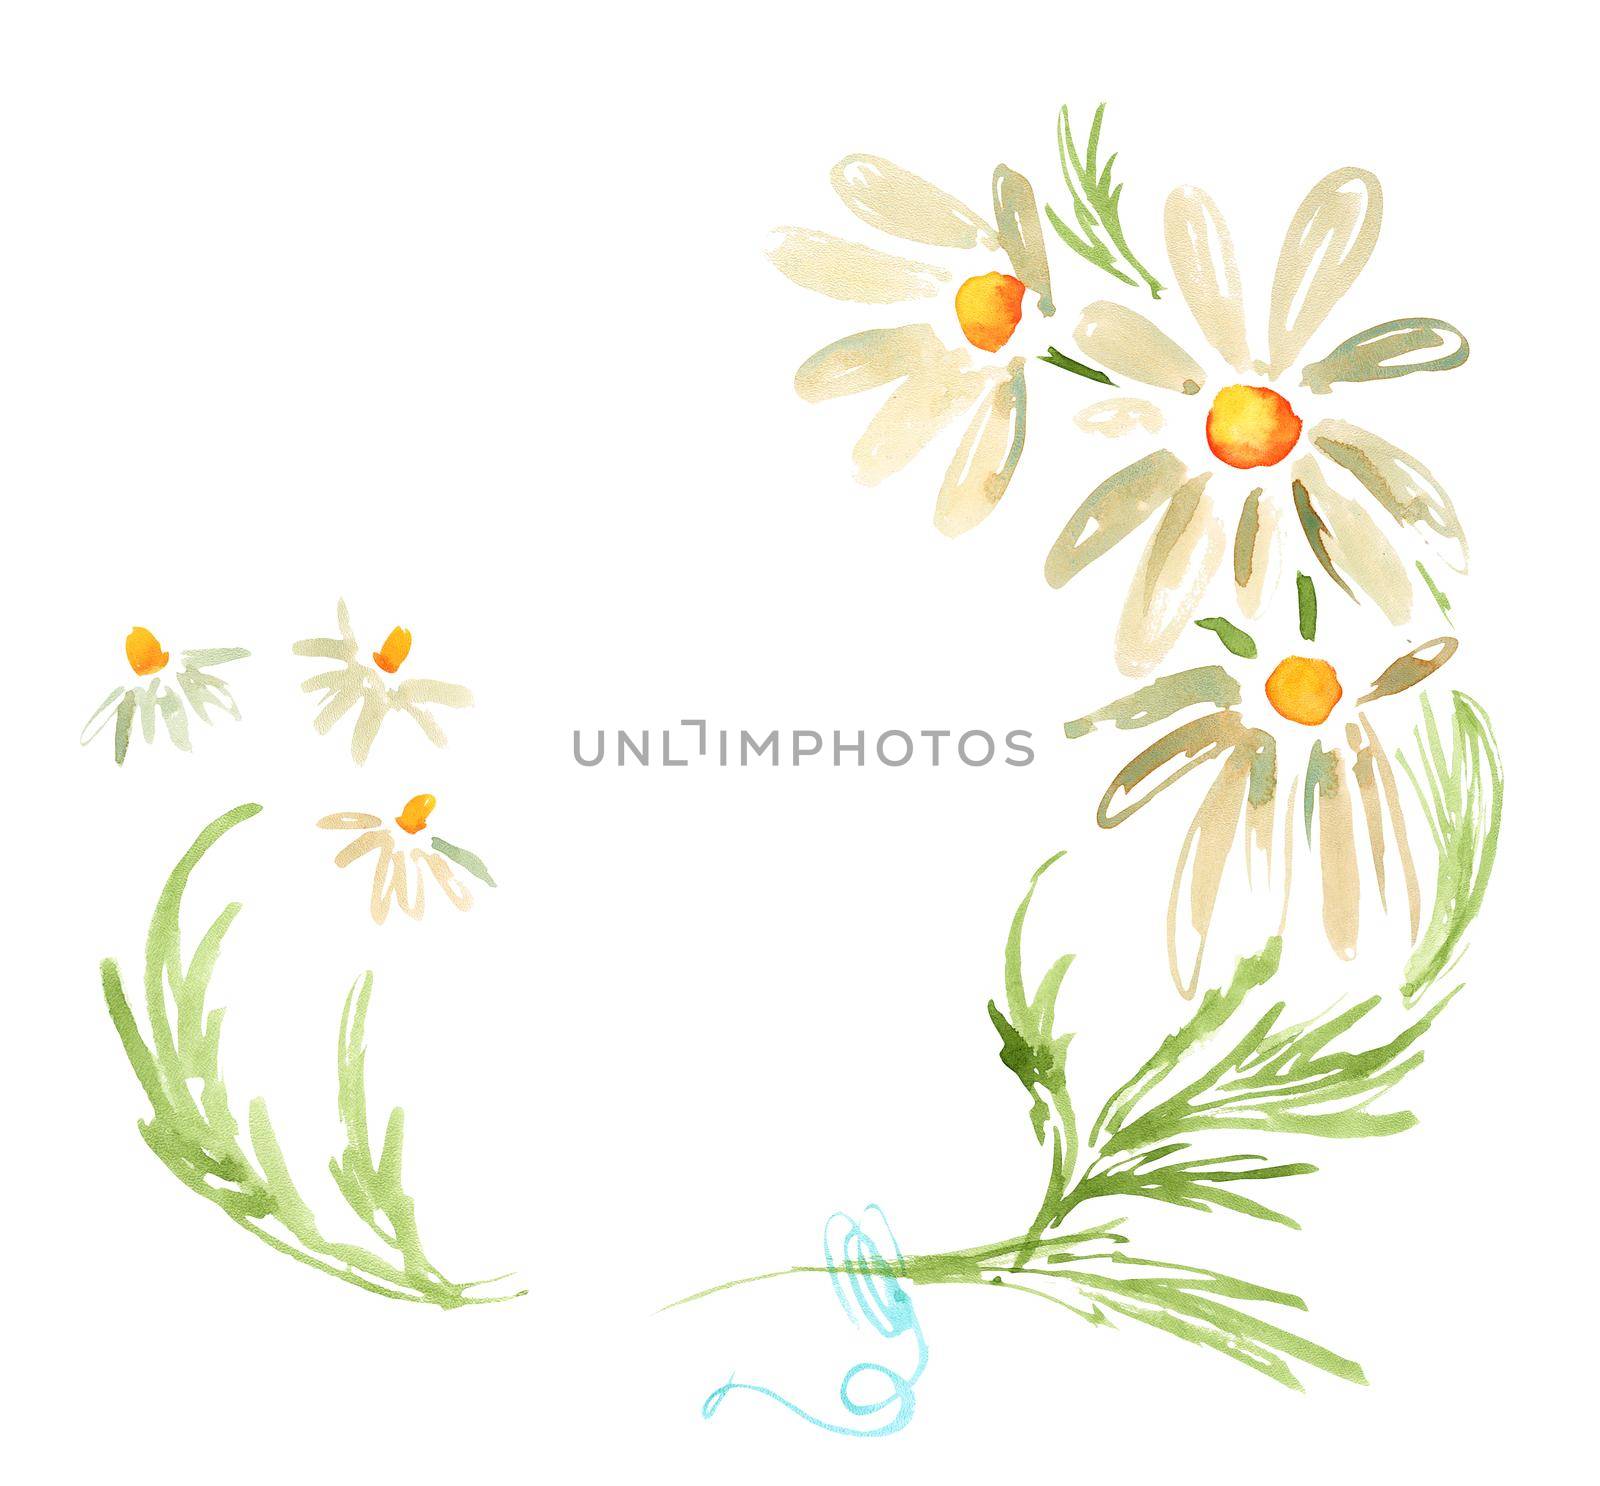 Watercolor decorative frame with daisies camomile flowers